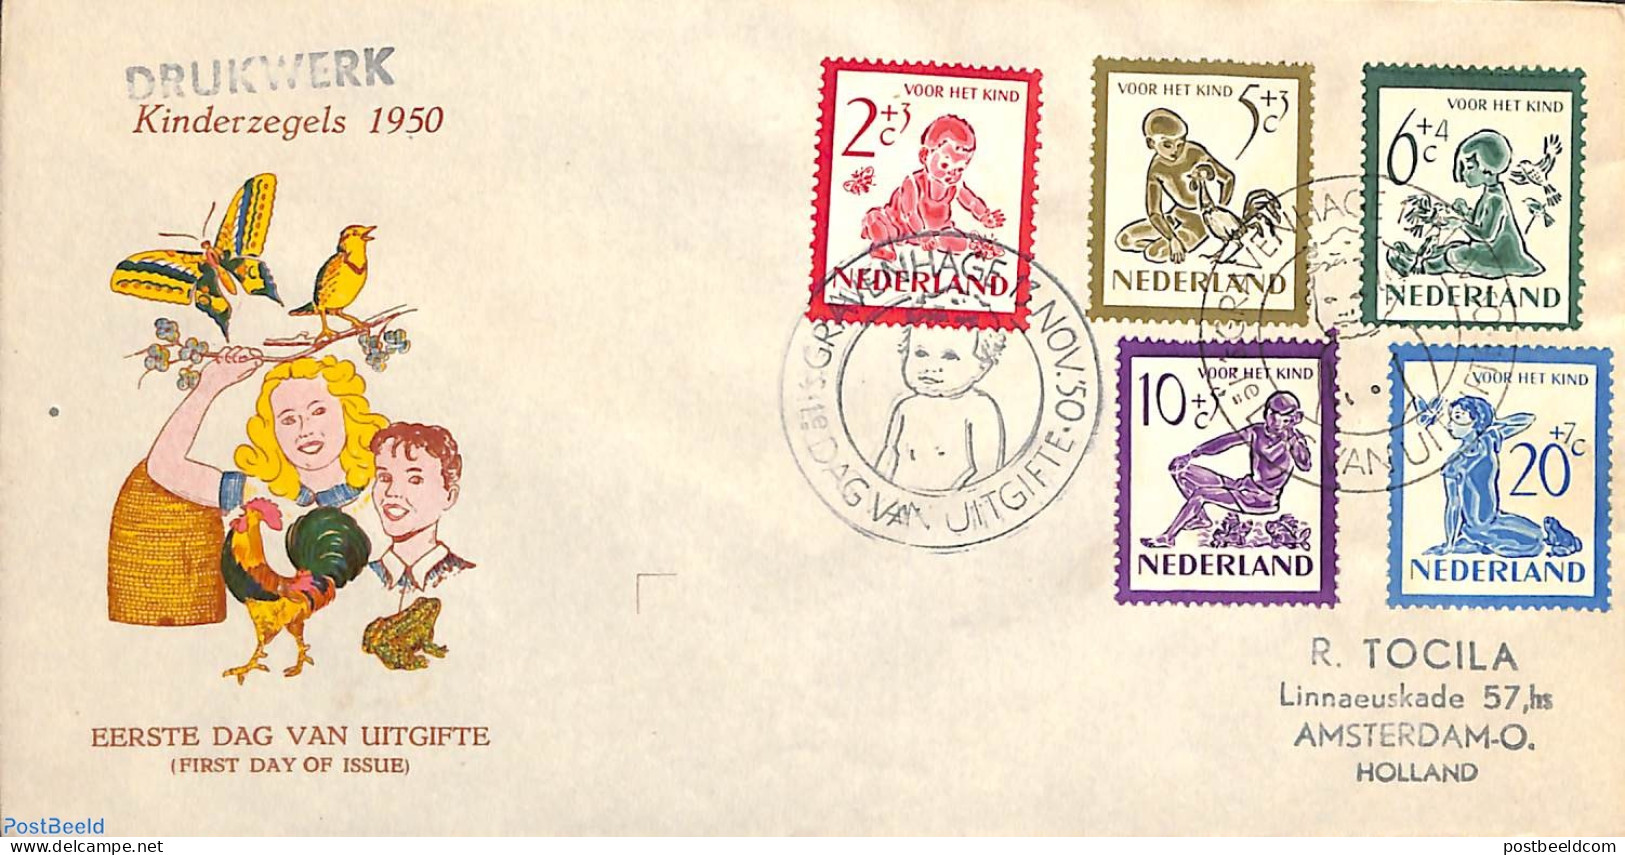 Netherlands 1950 Child Welfare 5v, FDC, Open Flap, Stamped Address, First Day Cover - Lettres & Documents